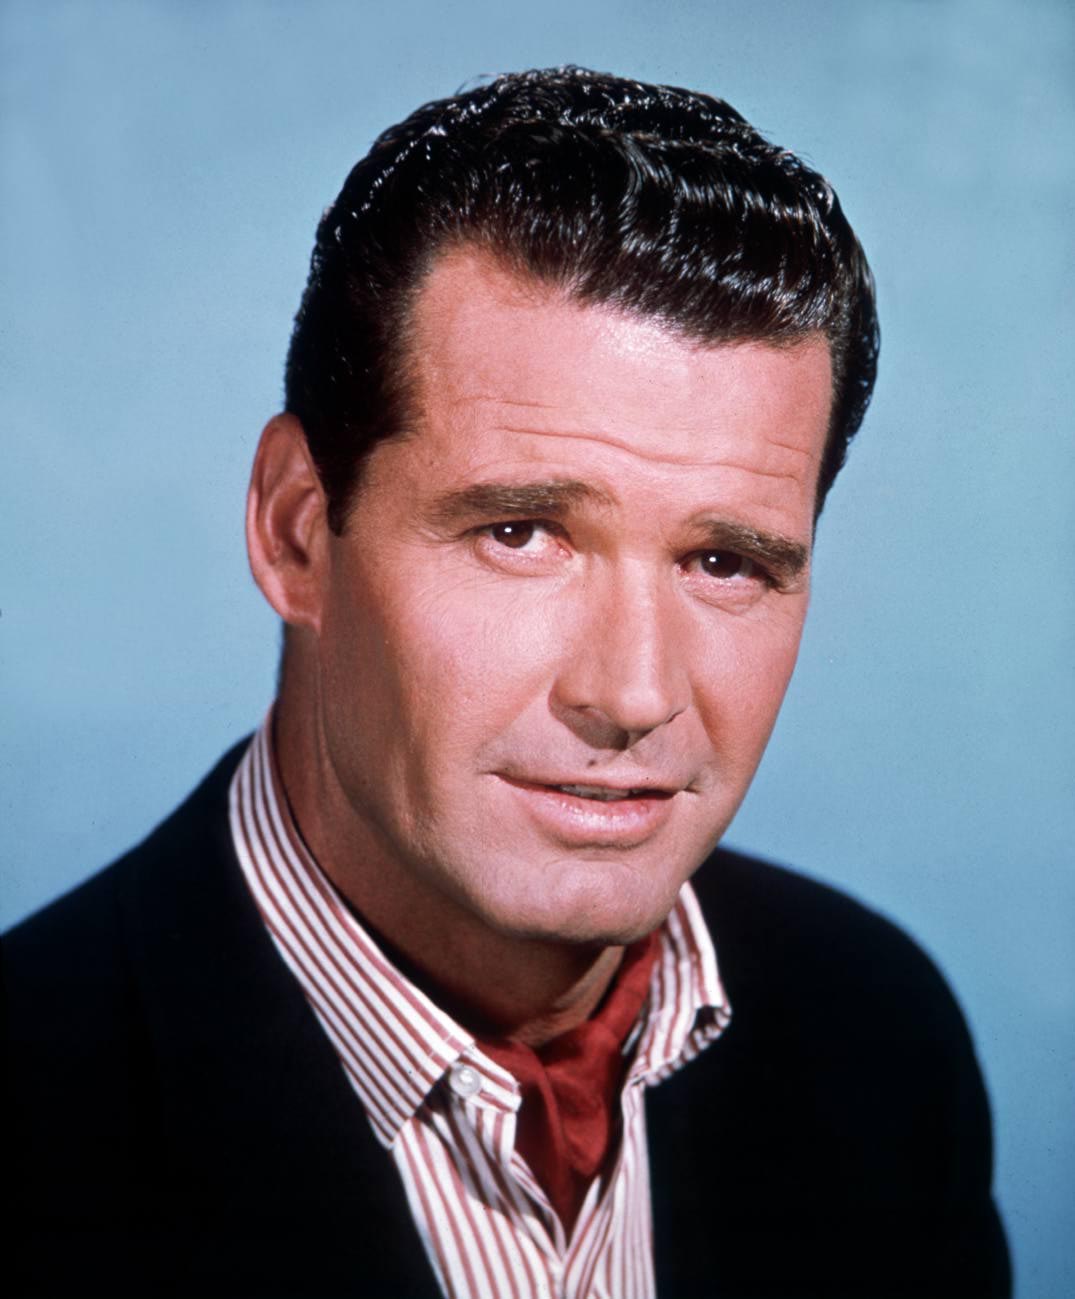 A portrait of American actor James Garner, on January 4, 1967. | Source: Getty Images